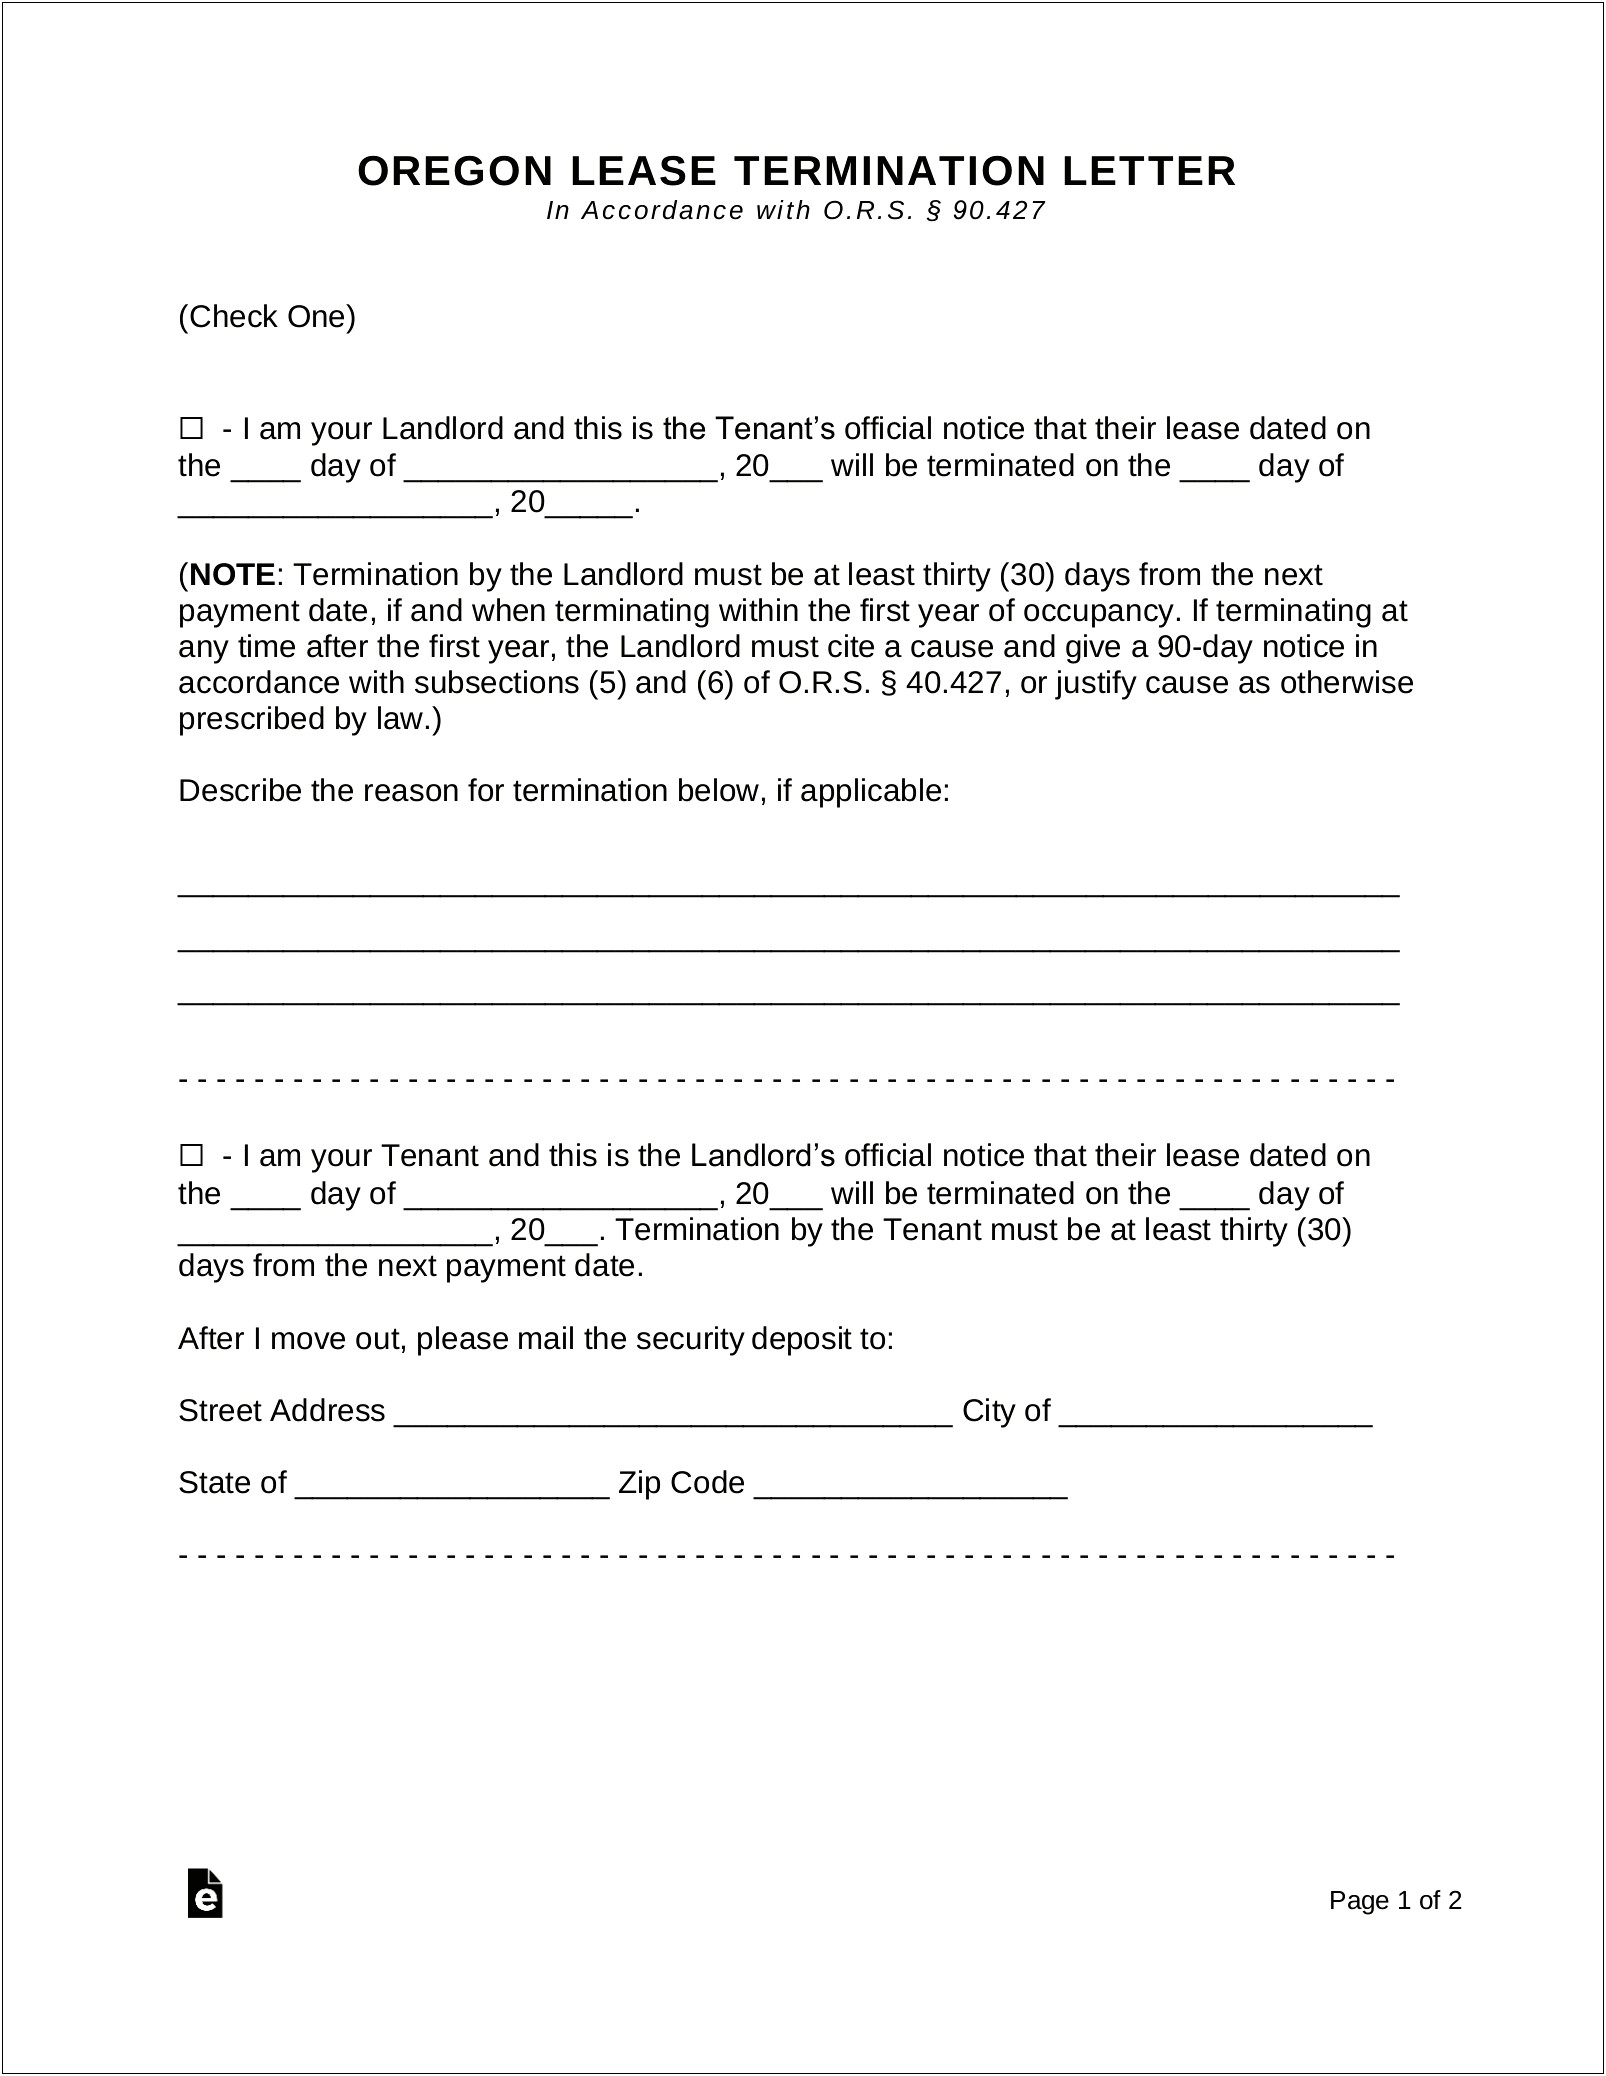 30 Day Notice To Landlord Letter Template